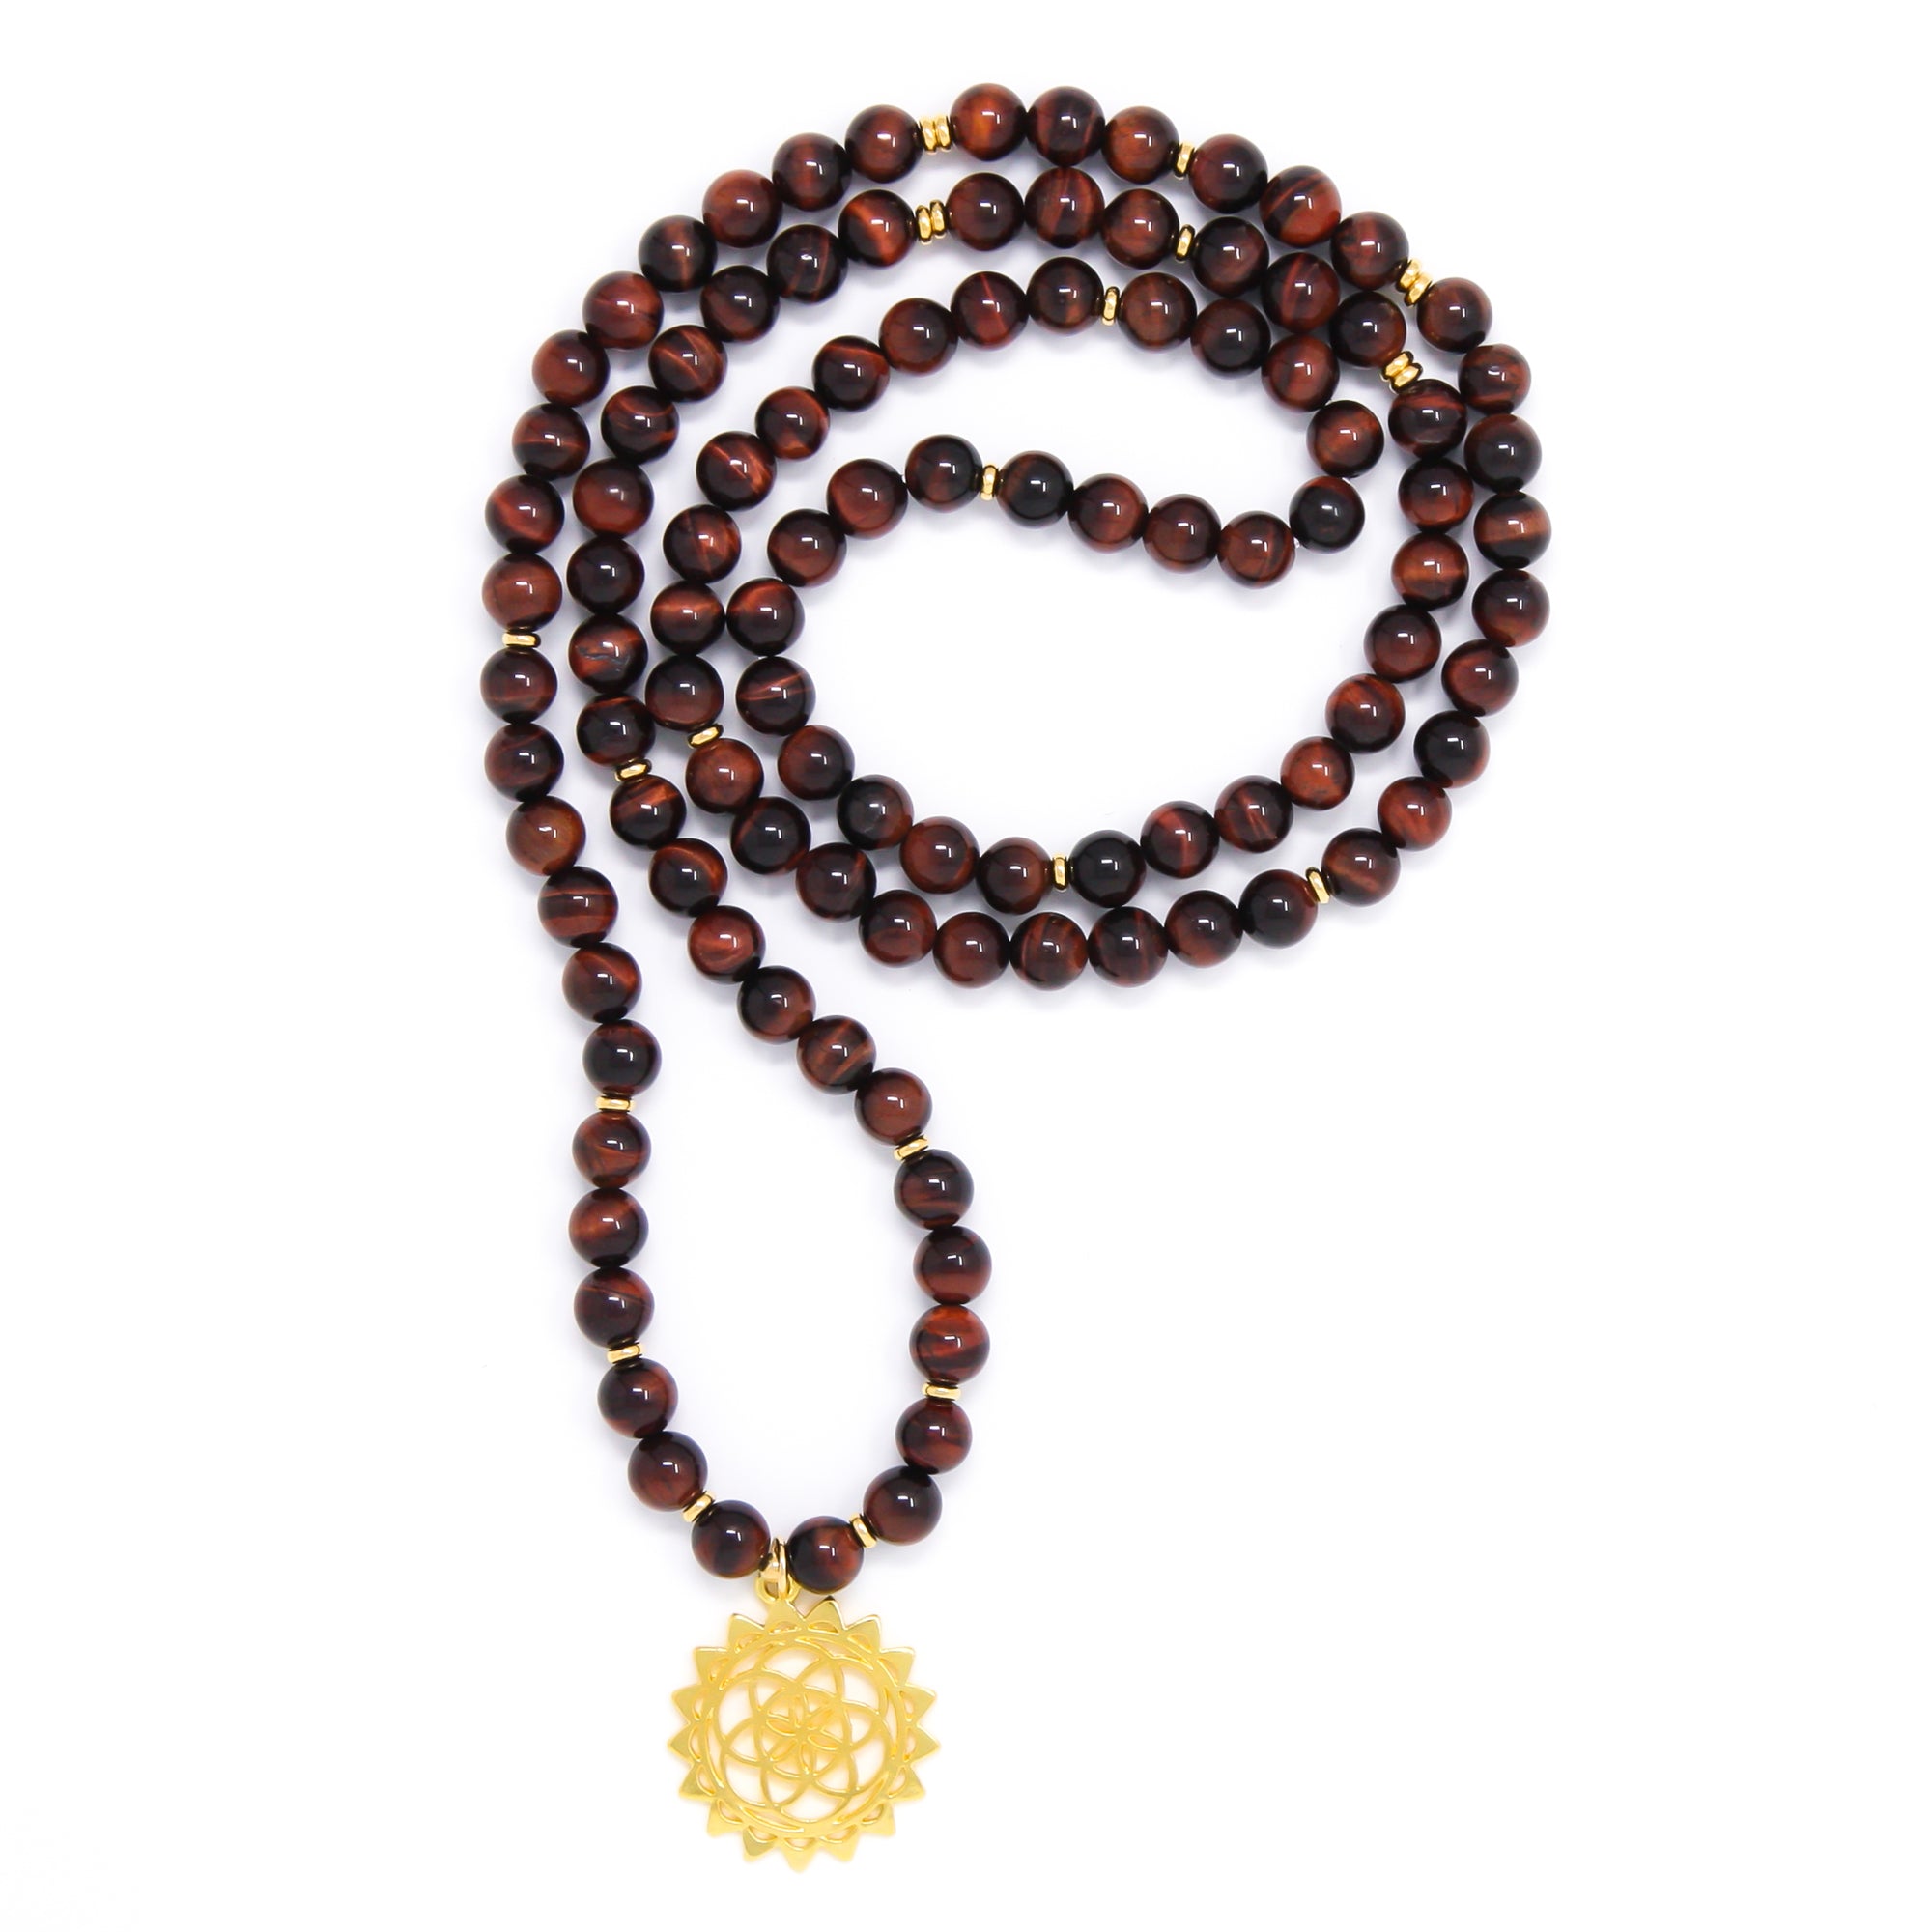 Red Tiger’s Eye Yoga Necklace / Bracelet with Seed of Life, spiritual jewelry